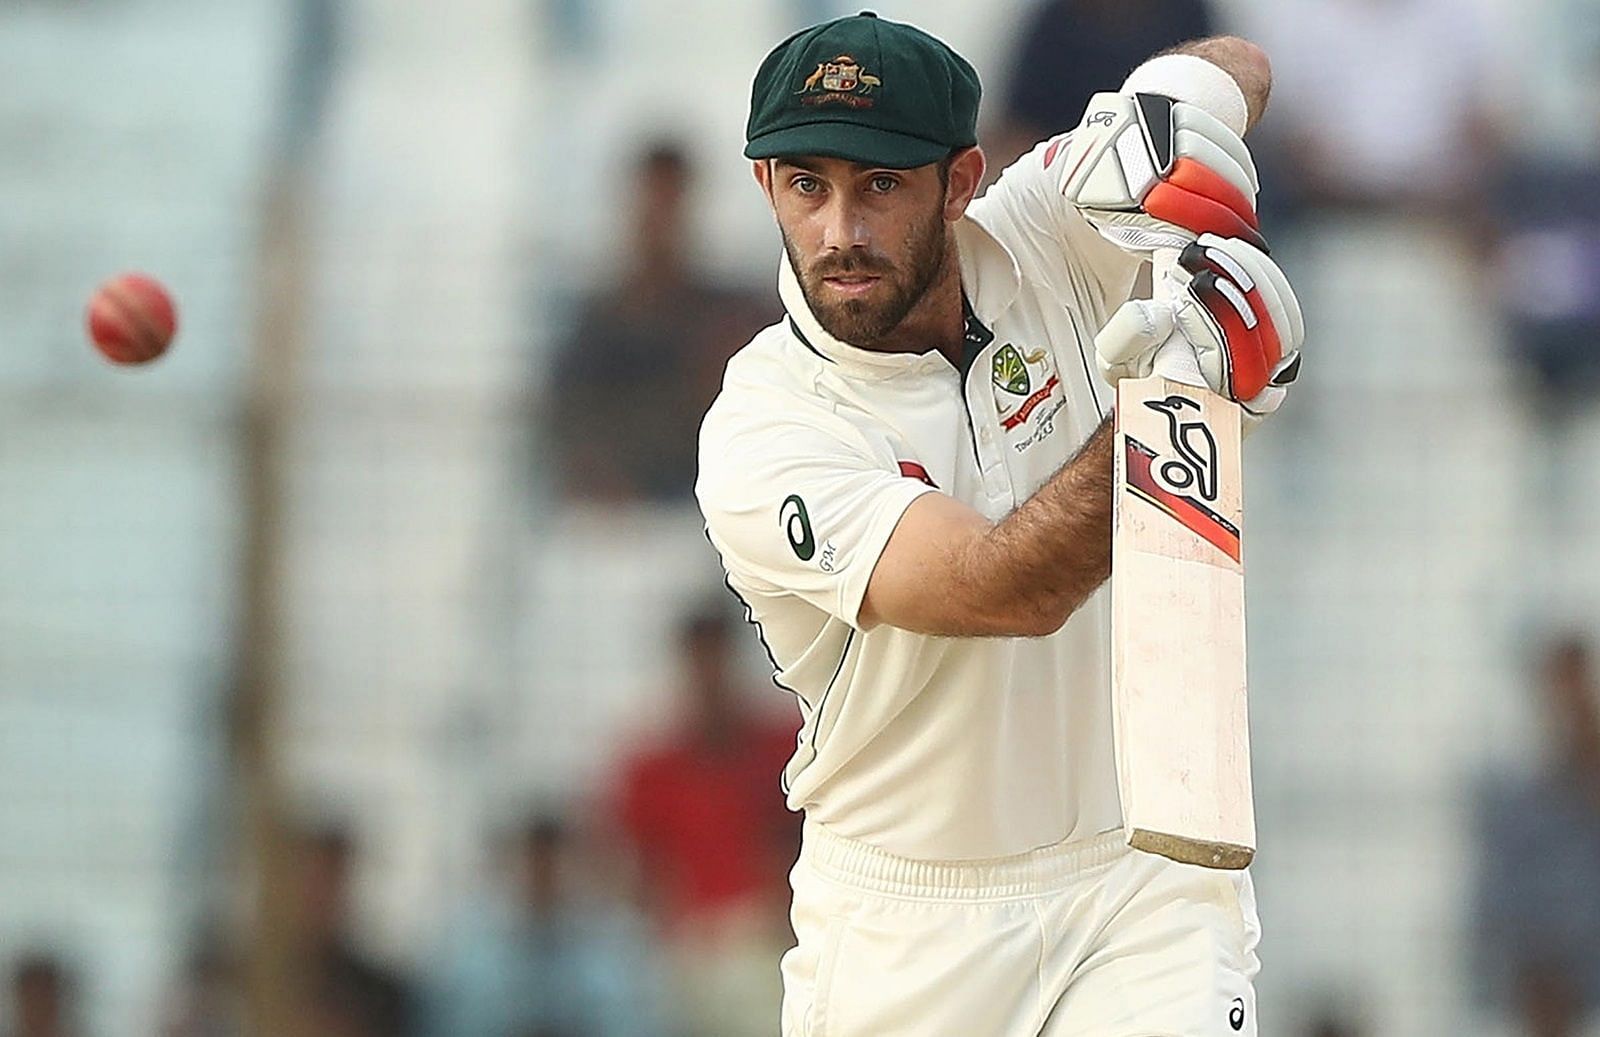 Glenn Maxwell comes into the squad following an injury crisis in the Australian squad